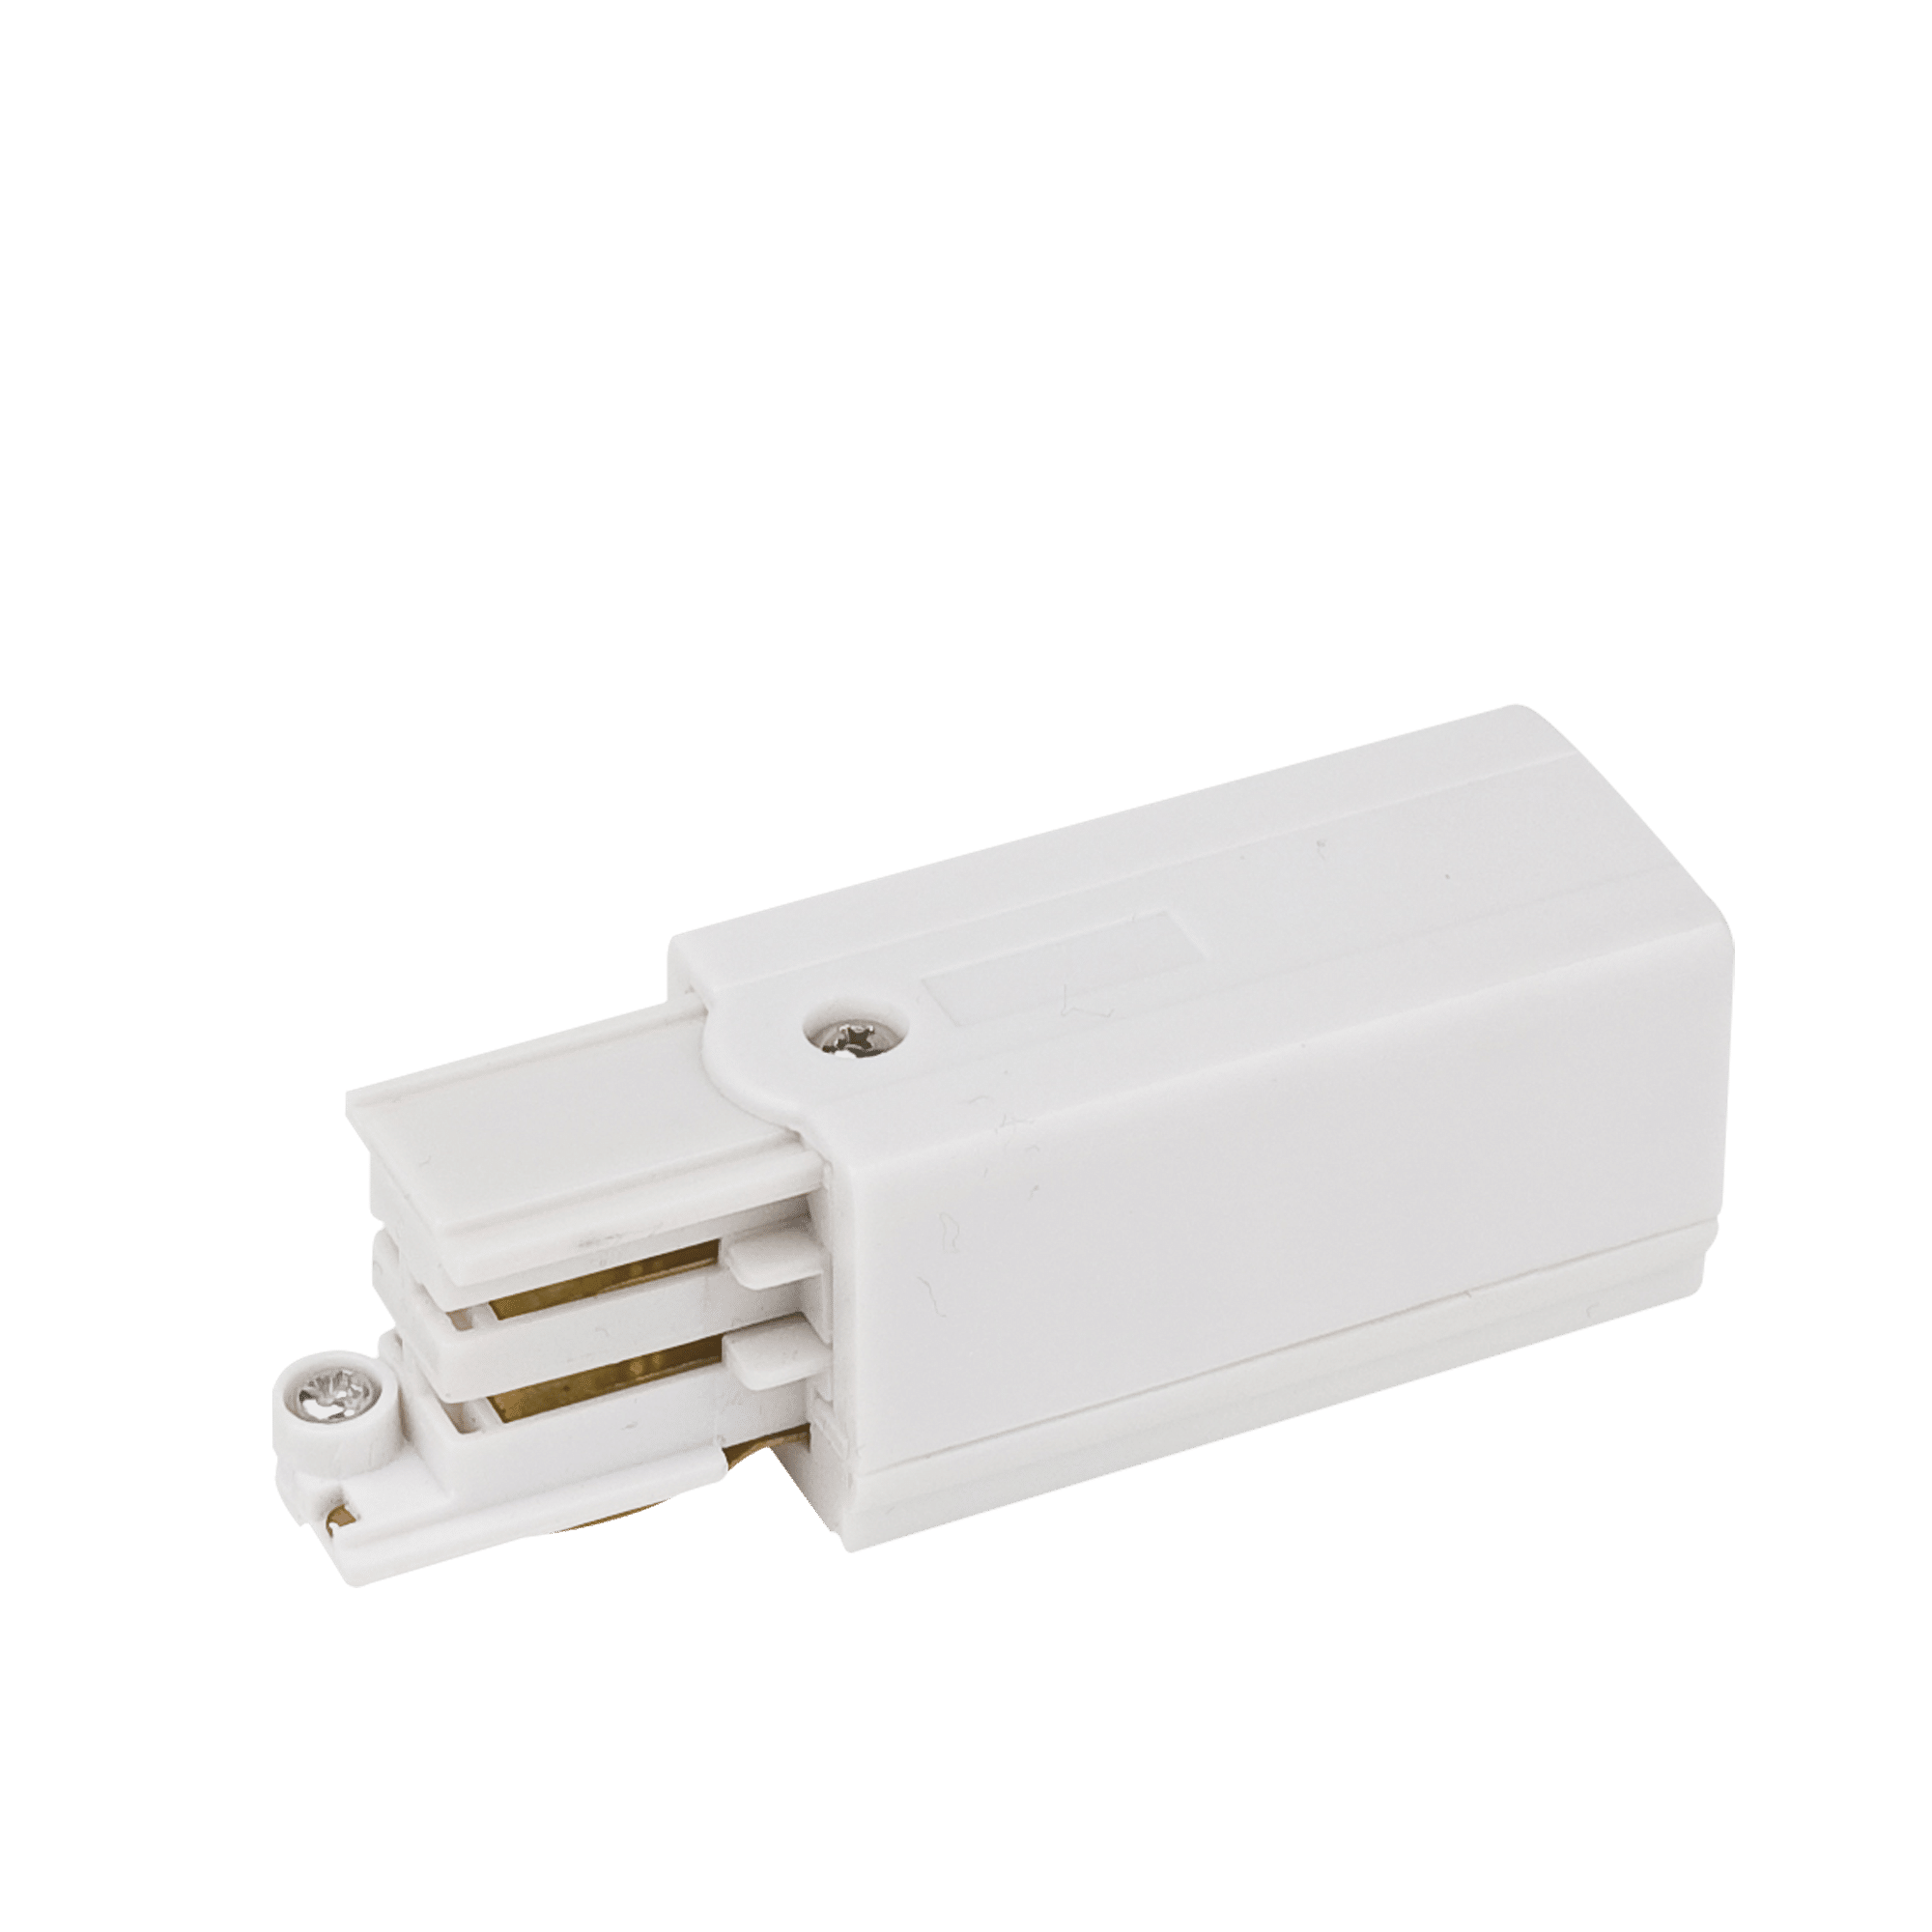 3-Phase Left Feed-In Connector - Onlinediscowinkel.nl